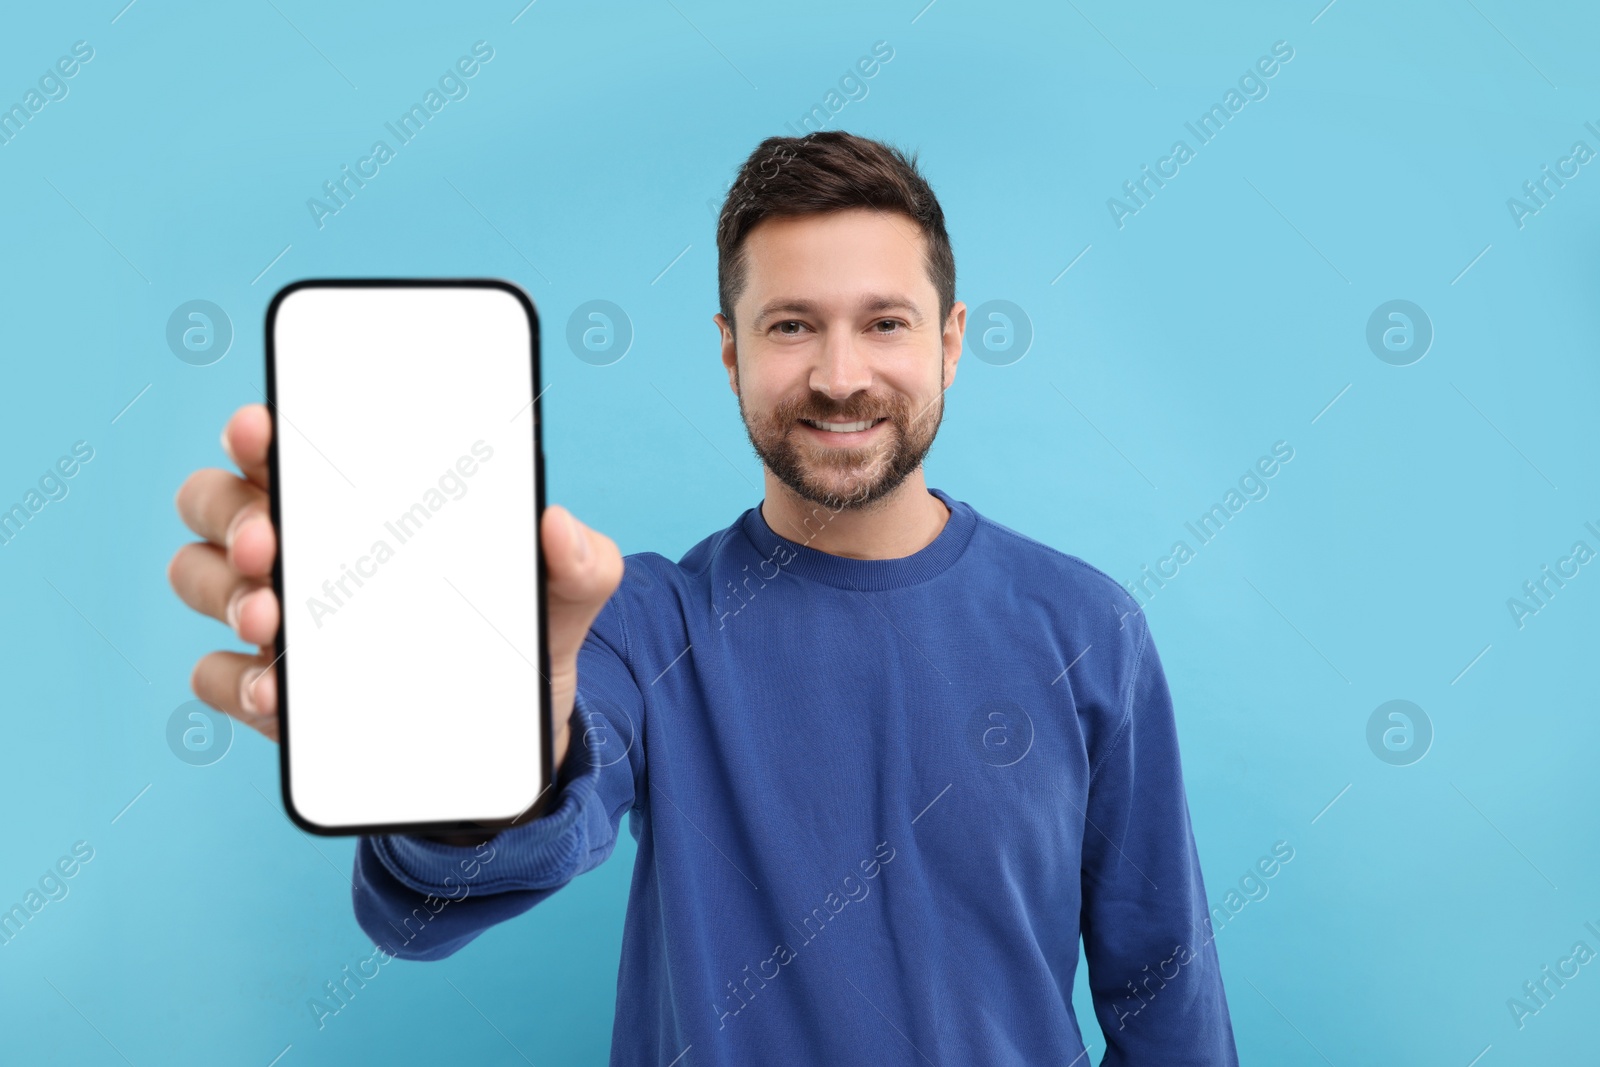 Photo of Handsome man showing smartphone in hand on light blue background